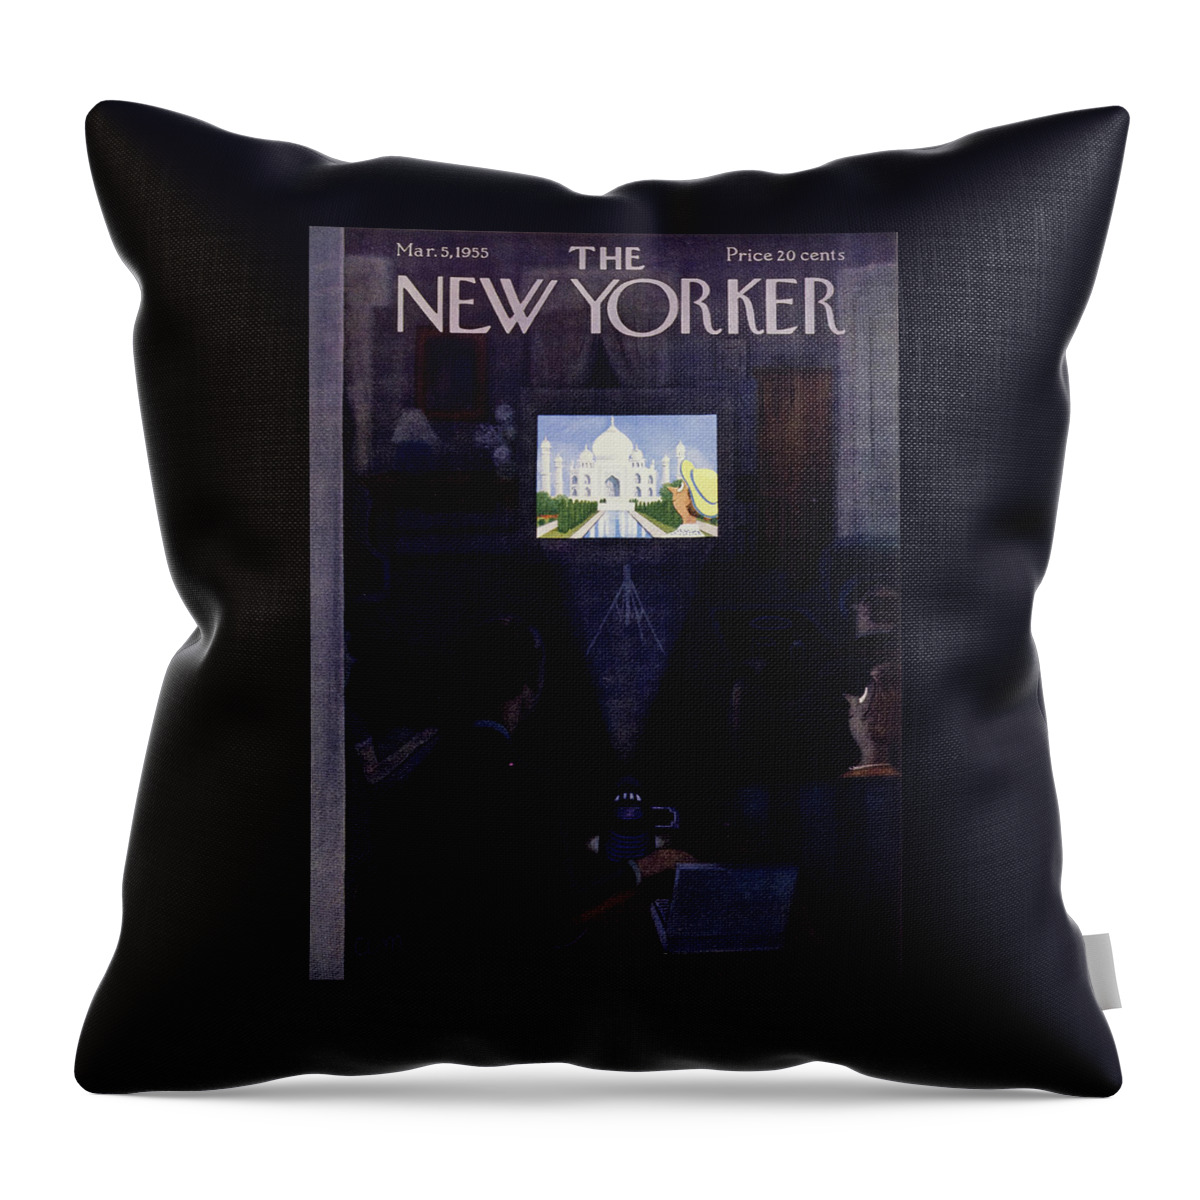 New Yorker March 5, 1955 Throw Pillow